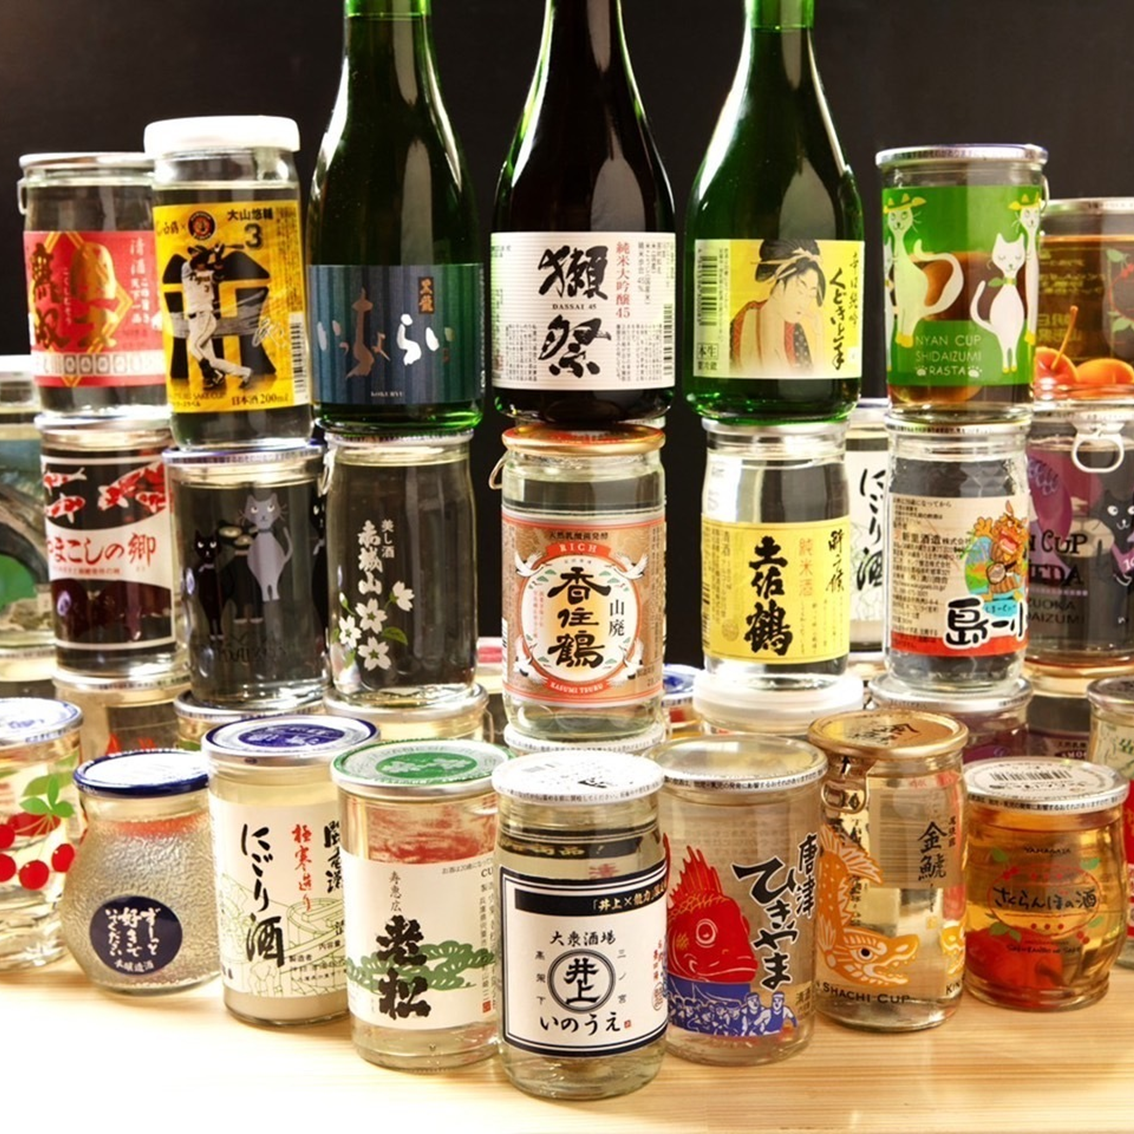 We offer local sake from all over Japan in "Cup Sake"!